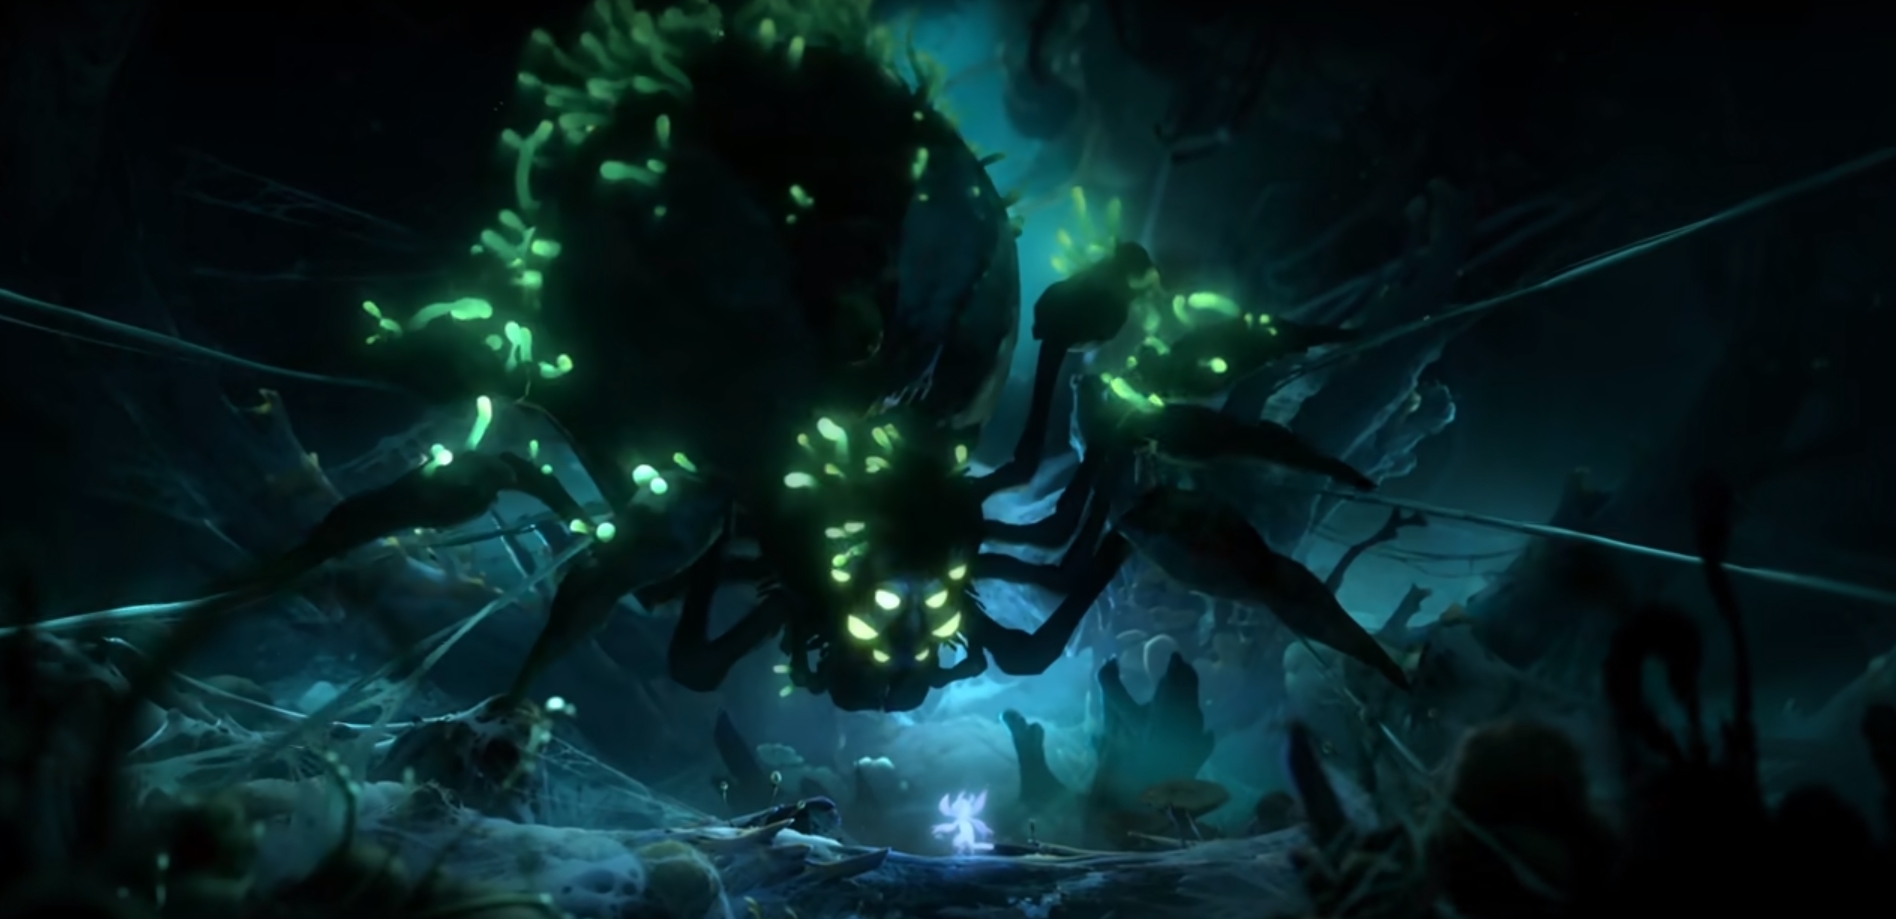 Moon Studios And Xbox Games’ Ori And The Will Of The Wisps Is Officially Released!